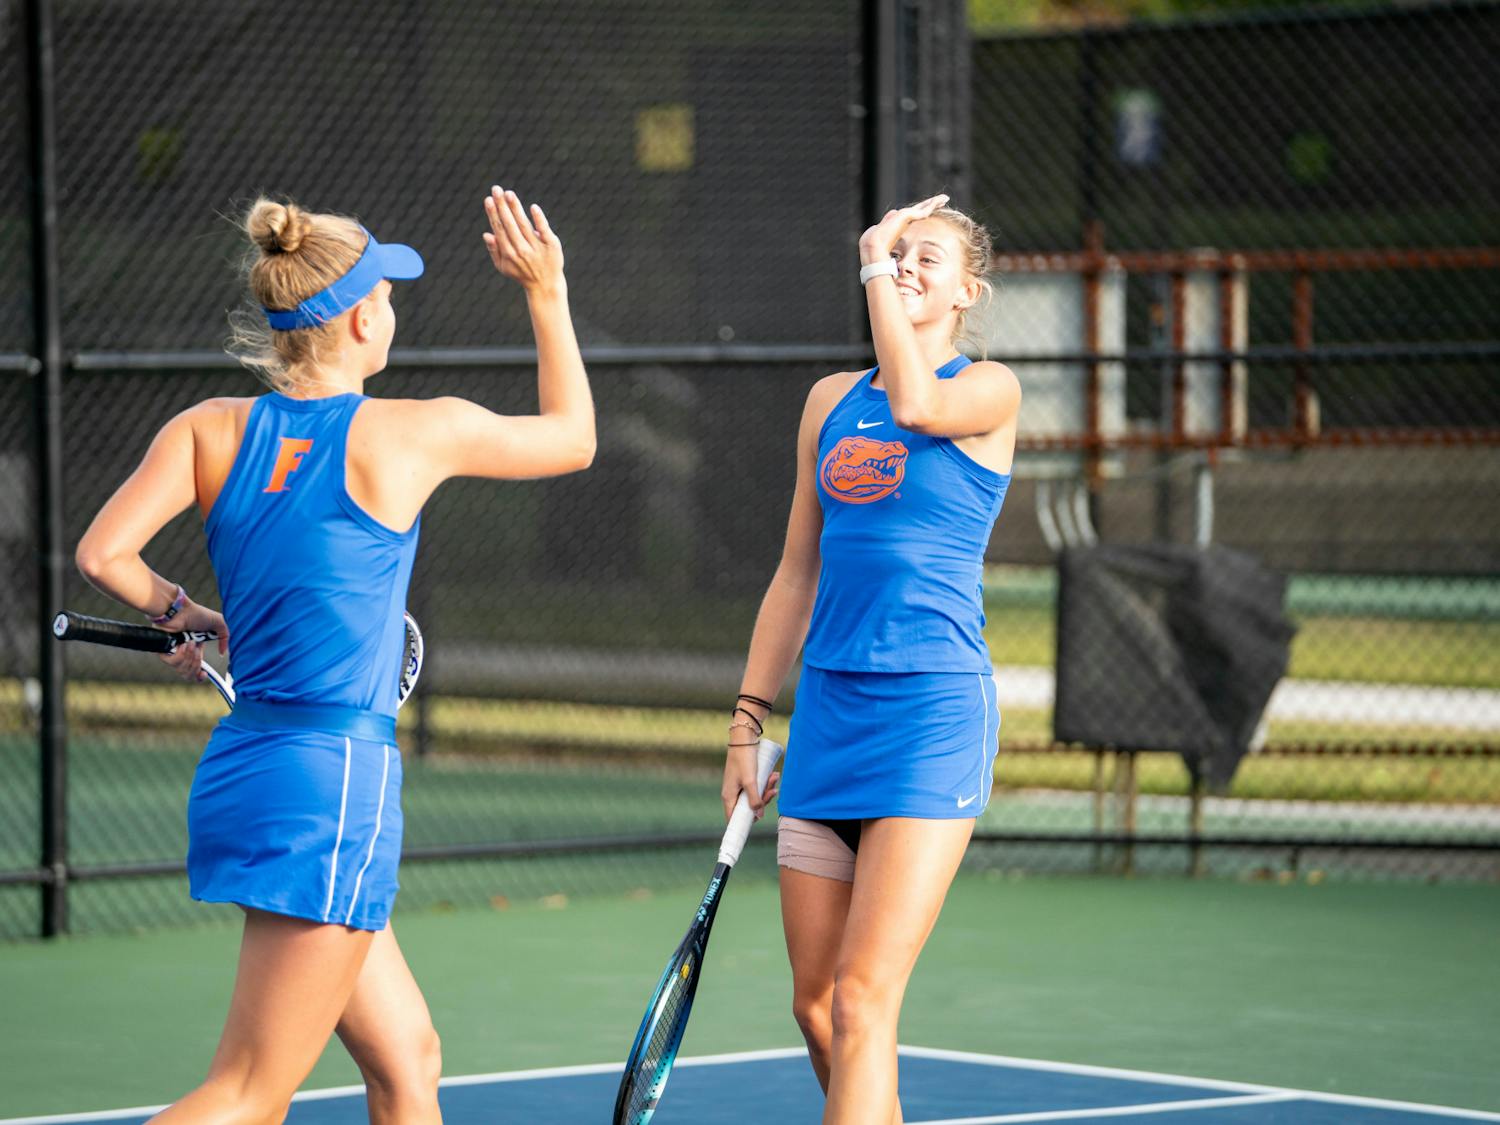 Florida sophomores Bente Spee (left) and Alicia Dudeney (right) at the ITA All-American Championships. Photo courtesy of the Intercollegiate Tennis Association.